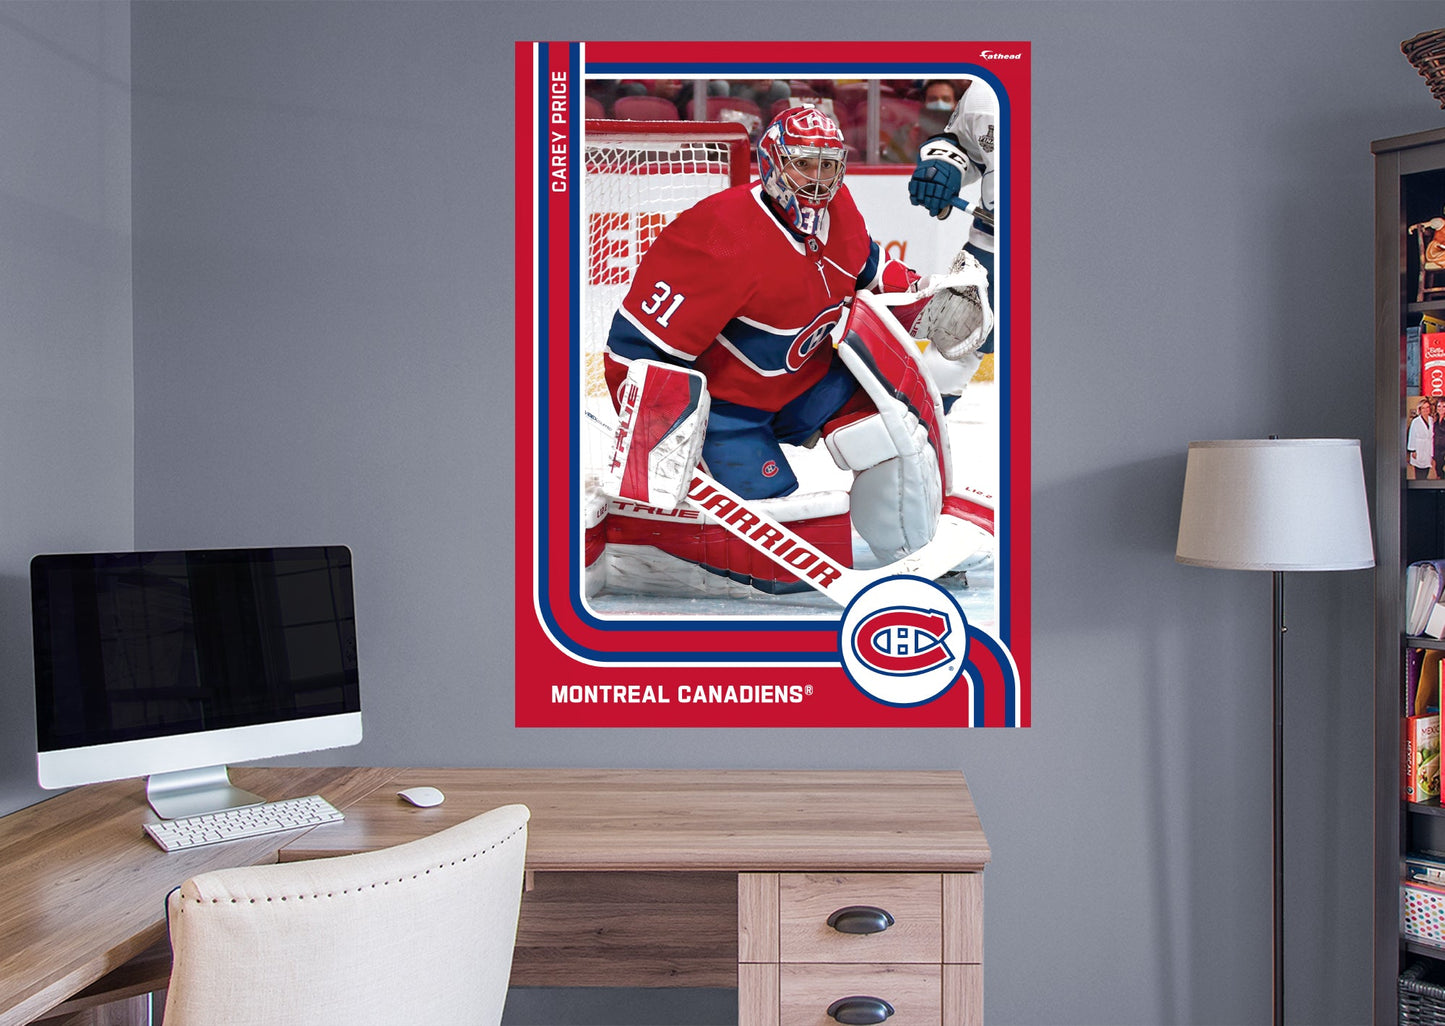 Montreal Canadiens: Carey Price Poster - Officially Licensed NHL Removable Adhesive Decal